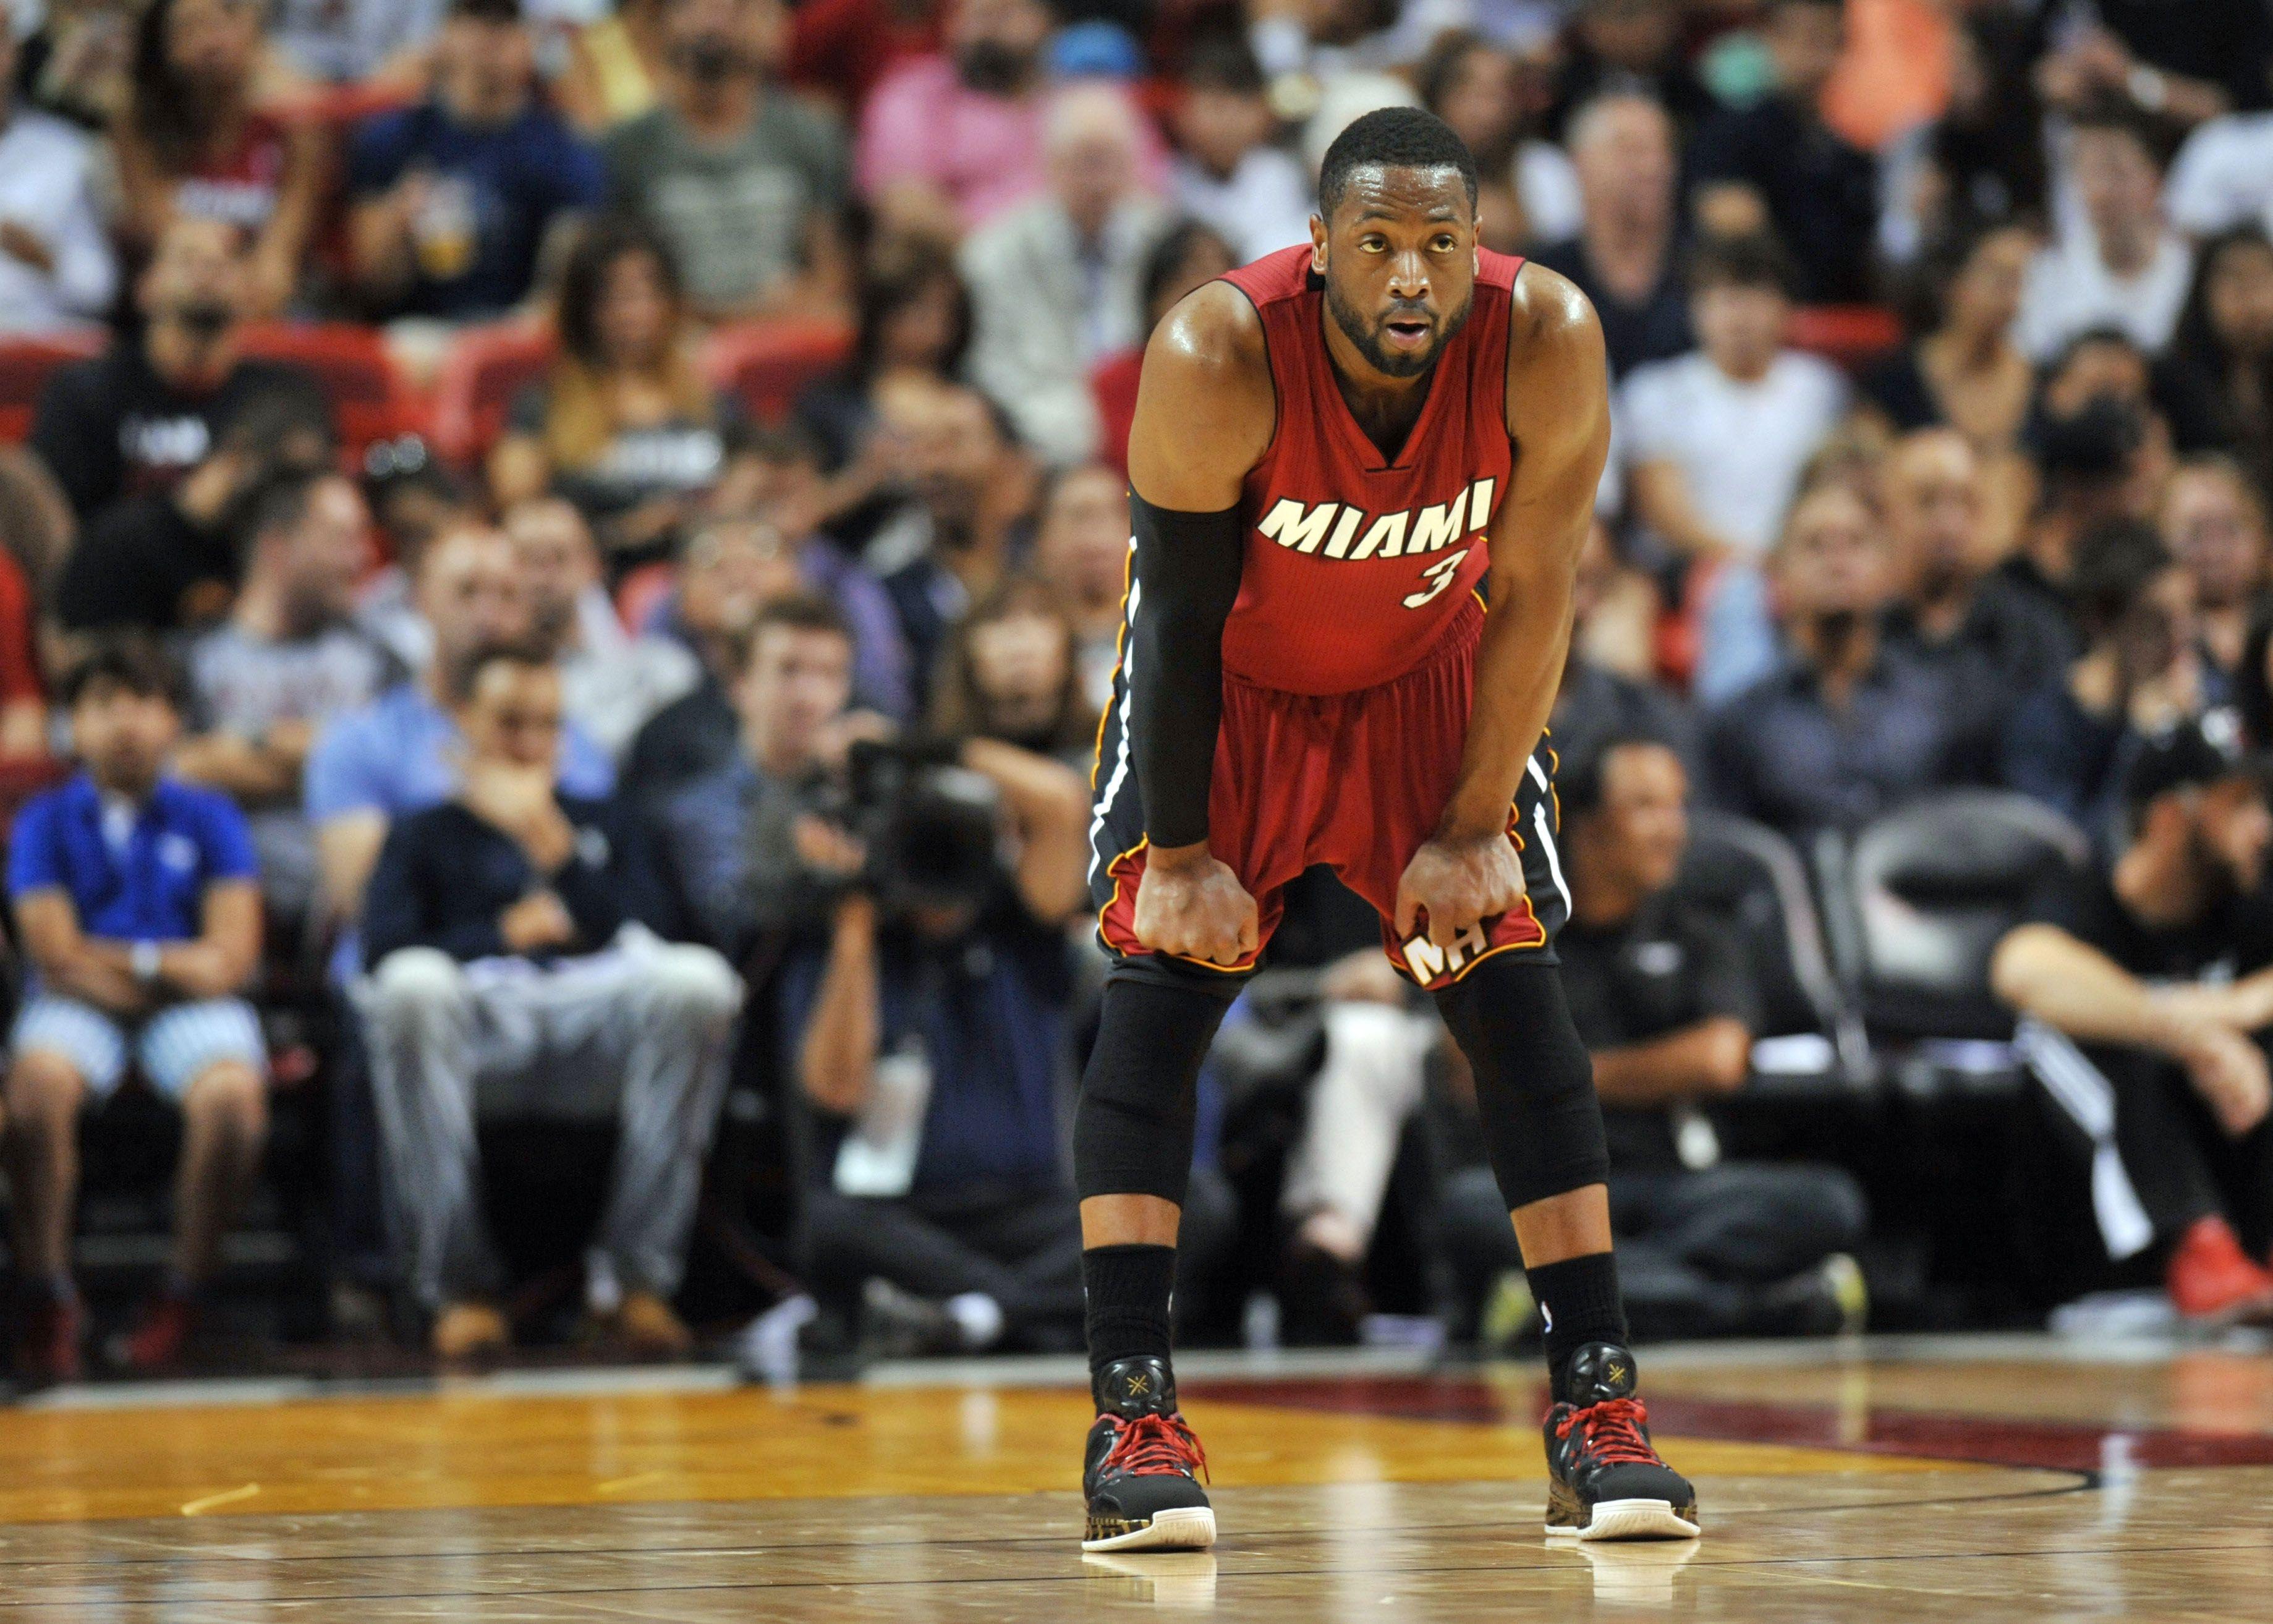 Dwyane Wade commits to joining Chicago Bulls